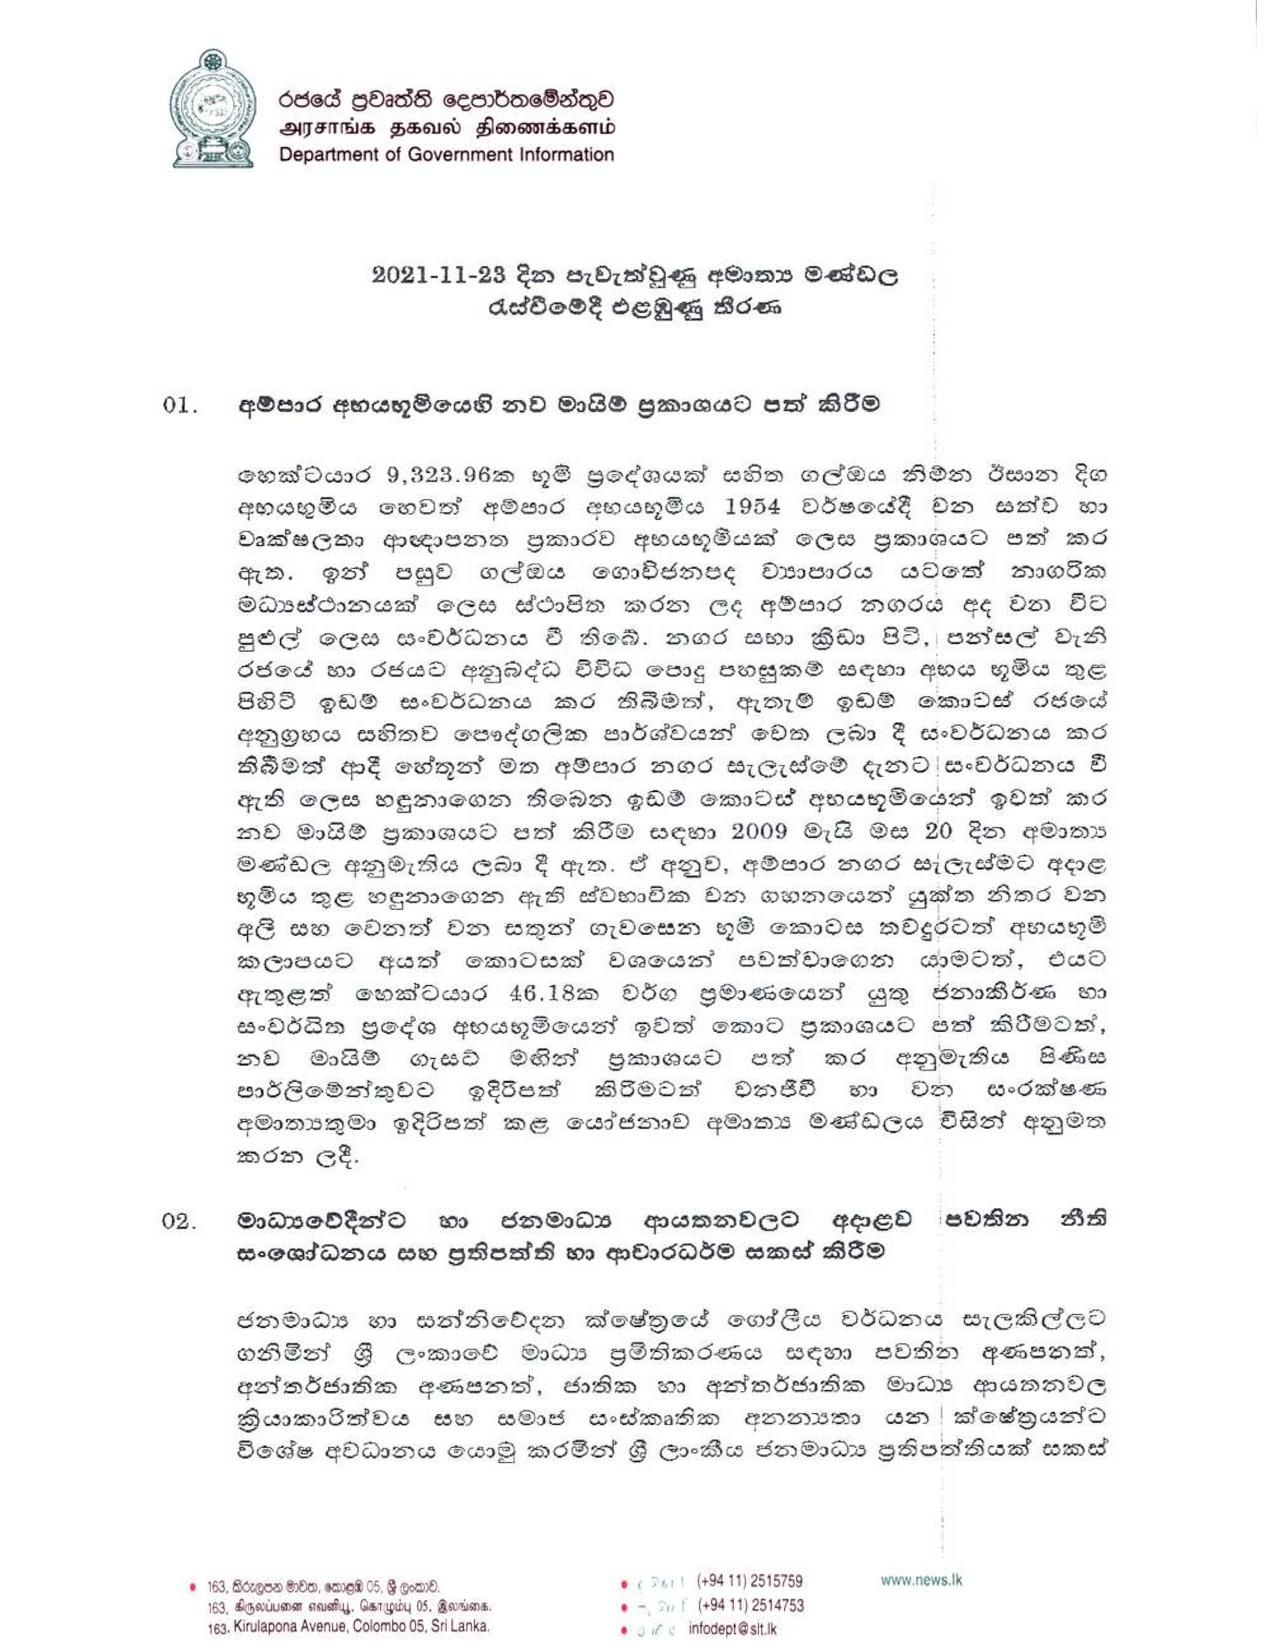 Cabinet Decision on 23.11.2021 page 001